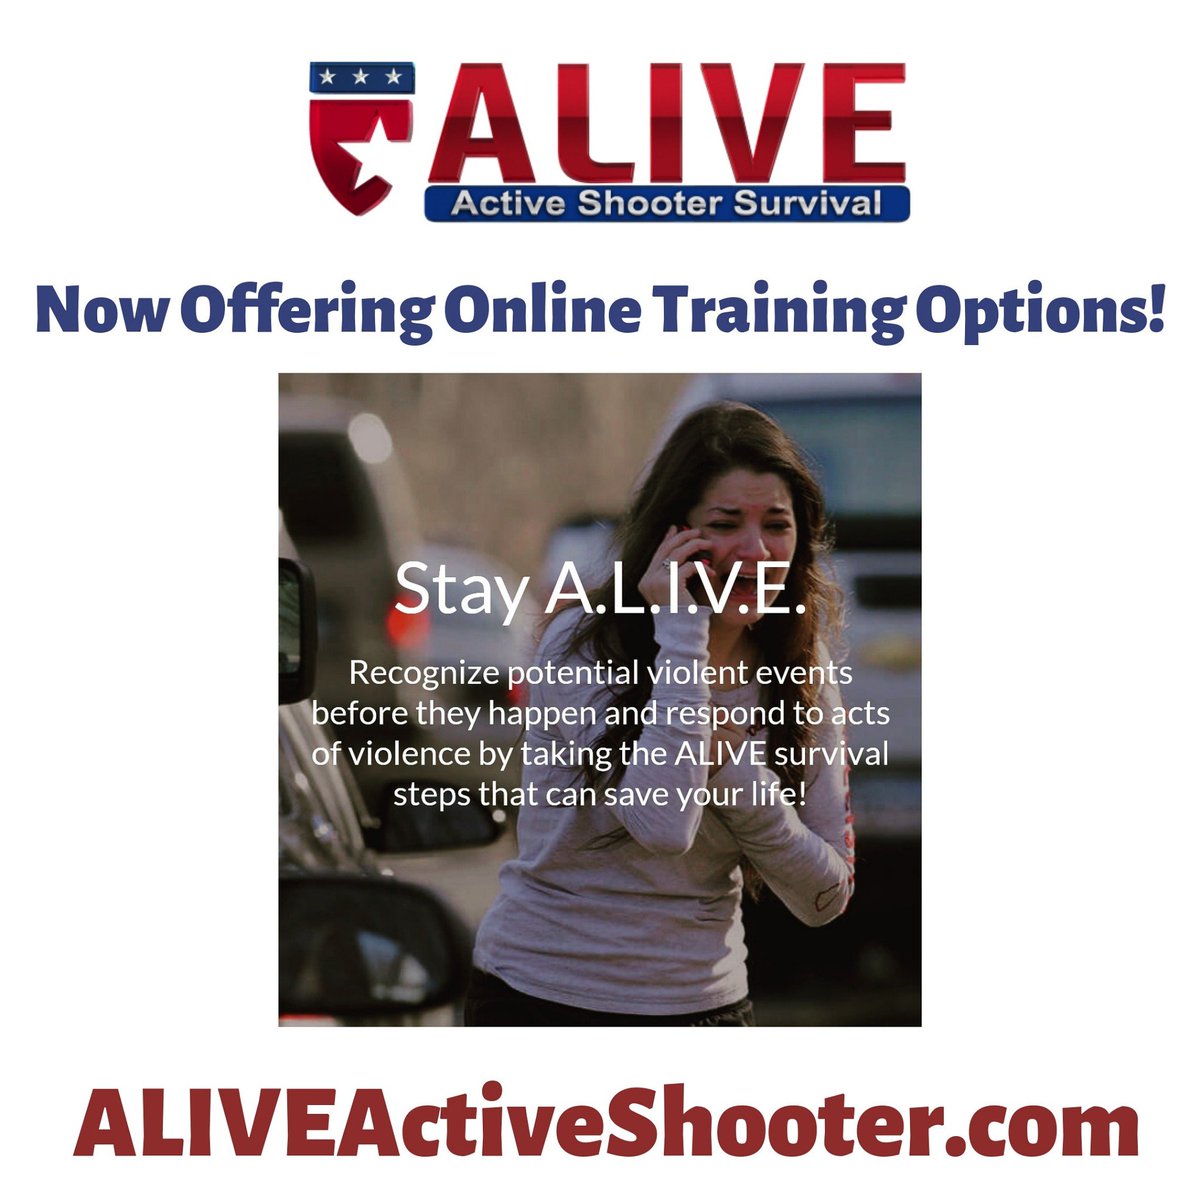 Michael Julian is offering his ALIVE Online Training Course for ⭐️50% OFF⭐️ offer good until 8/1/19
#ActiveShooter #ActiveAssailant #StayALIVE #ActiveShooterSurvivalTraining
ALIVEActiveShooter.com